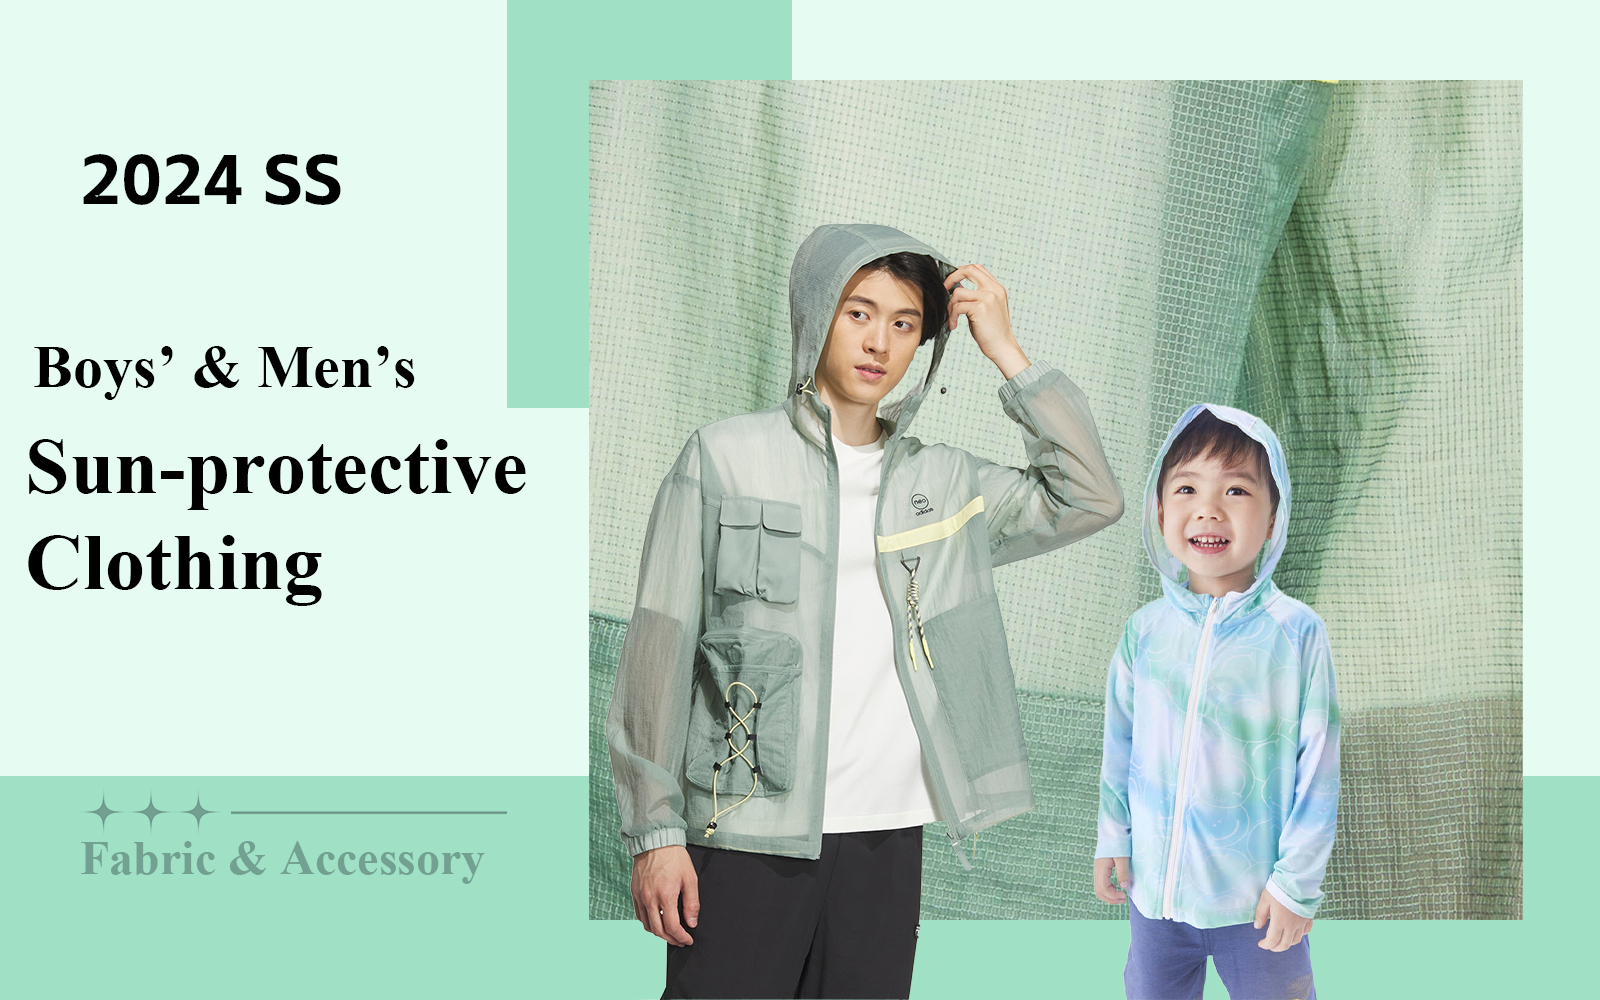 The Fabric Trend for Men's & Boys' Sun-protective Clothing